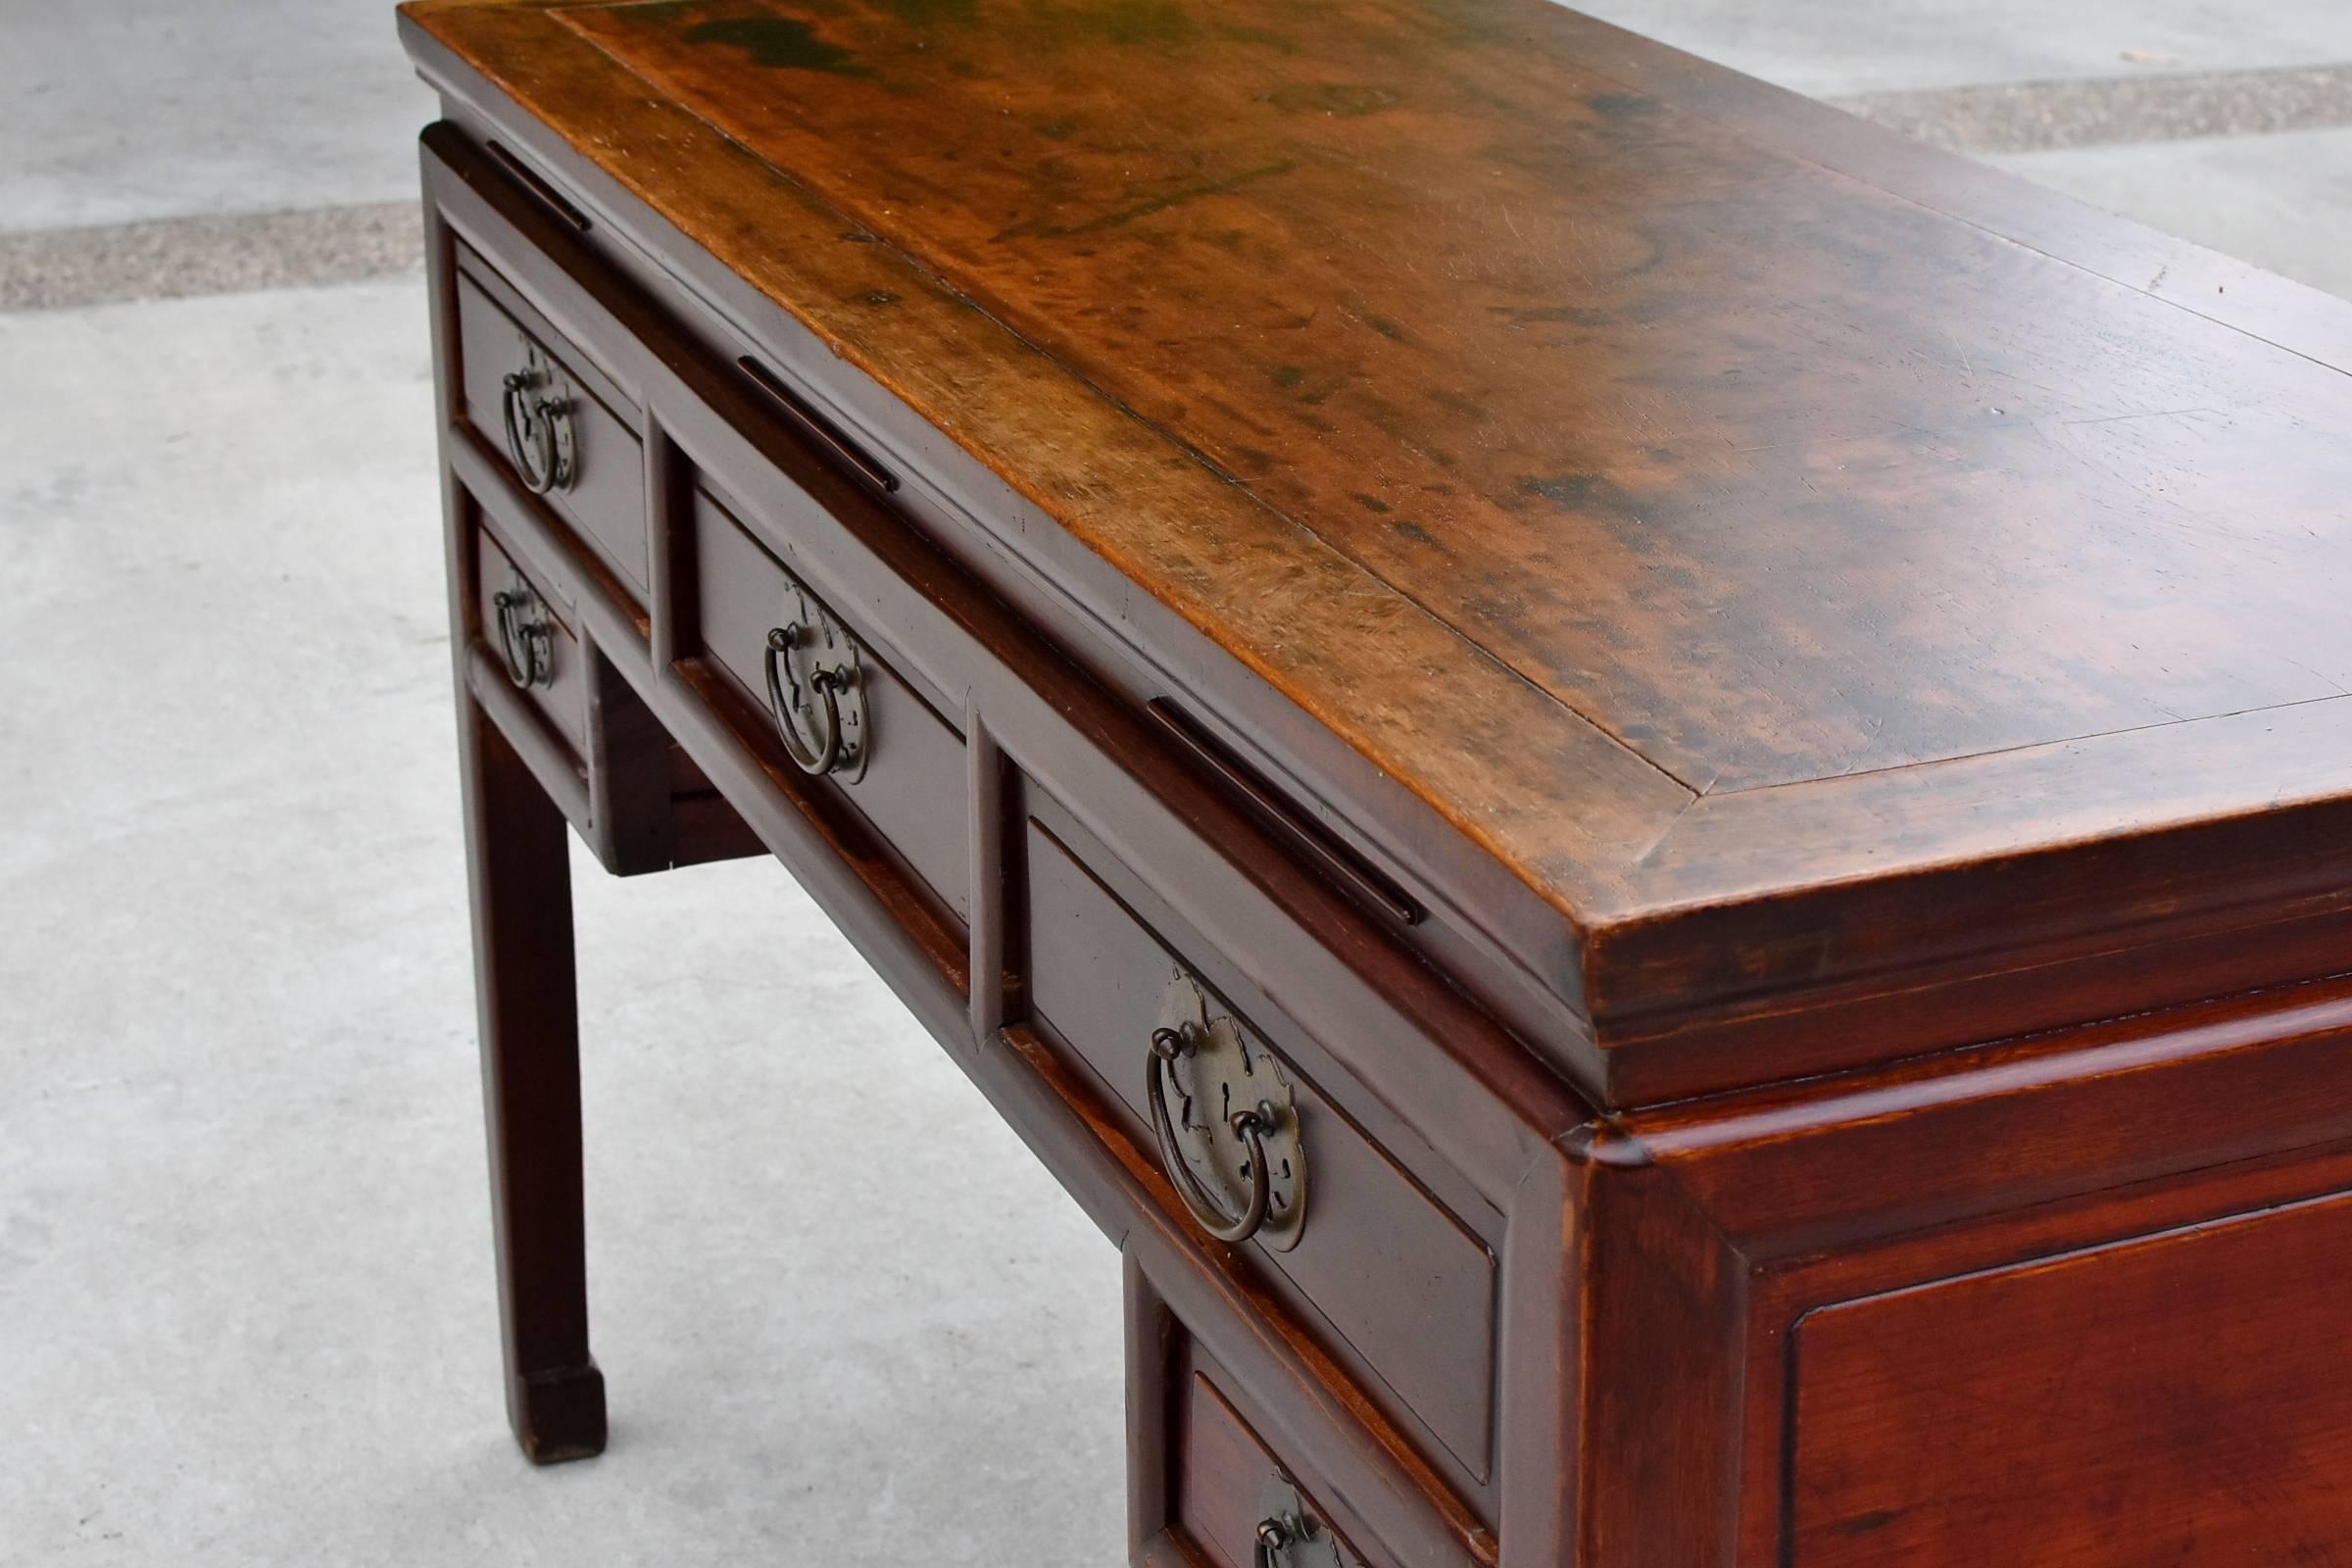 Brass Antique Accountant's Desk, Chinese Solid Wood Desk